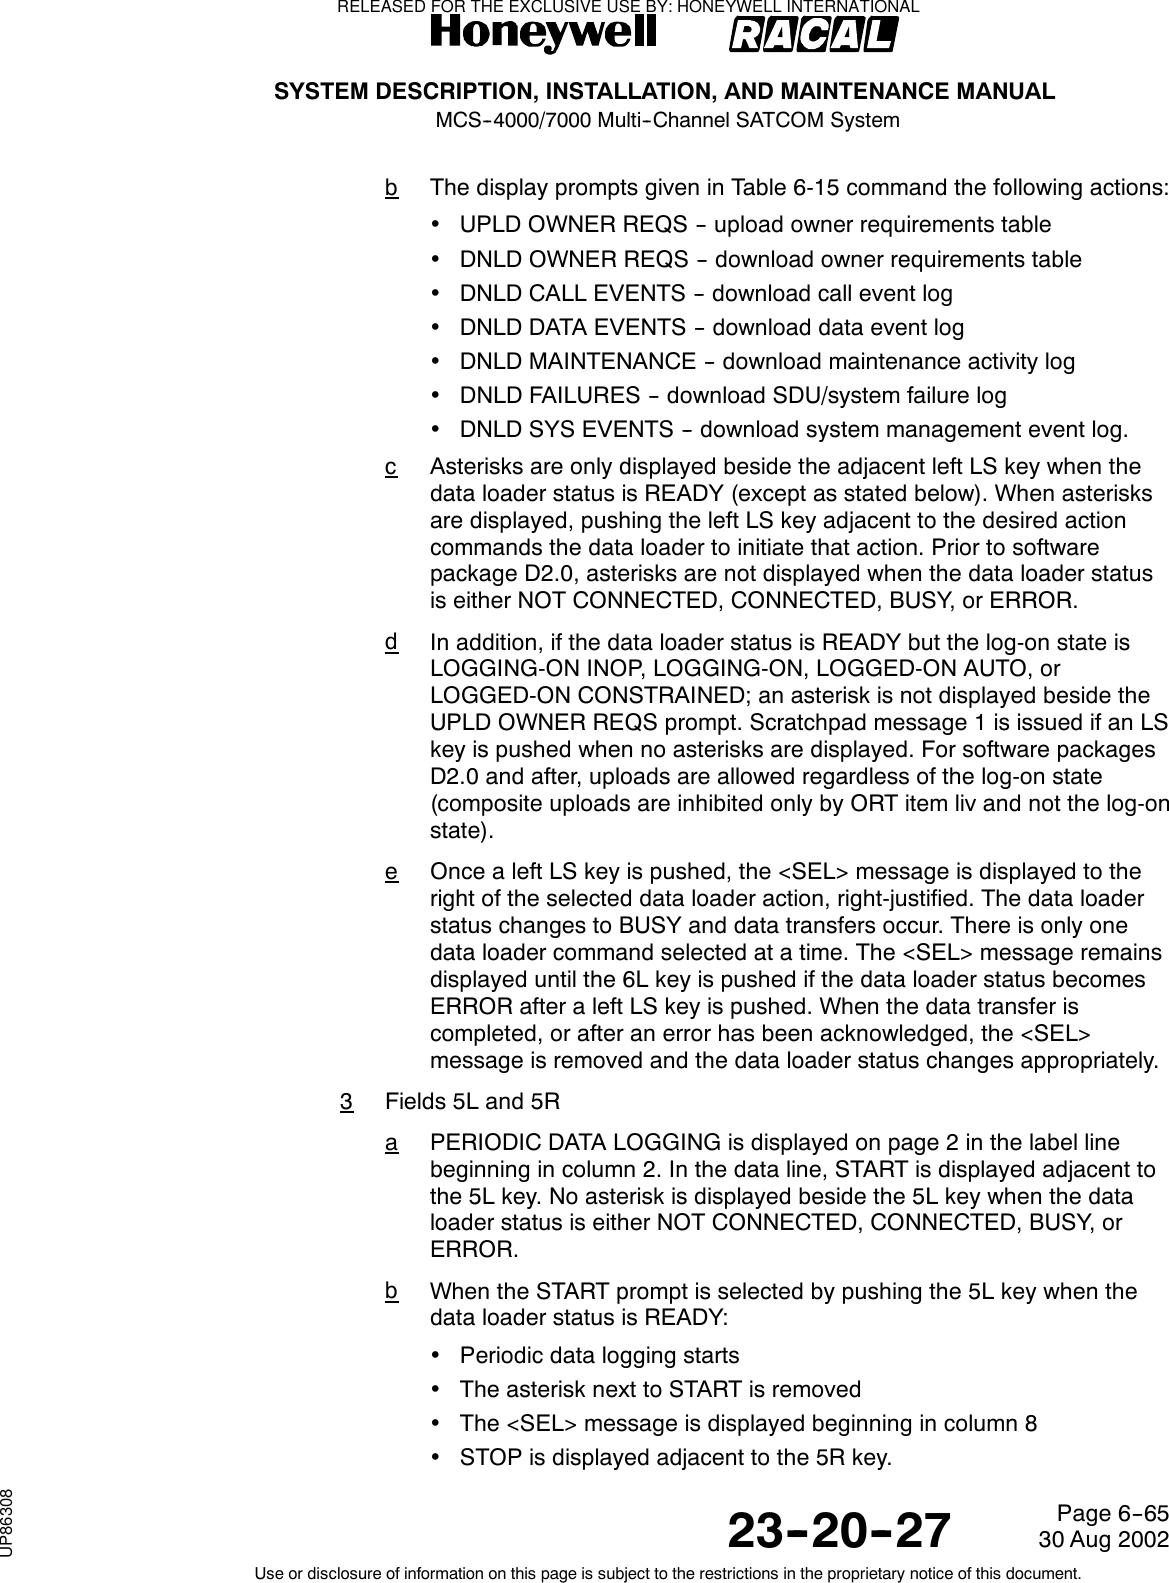 SYSTEM DESCRIPTION, INSTALLATION, AND MAINTENANCE MANUALMCS--4000/7000 Multi--Channel SATCOM System23--20--2730 Aug 2002Use or disclosure of information on this page is subject to the restrictions in the proprietary notice of this document.Page 6--65bThe display prompts given in Table 6-15 command the following actions:•UPLD OWNER REQS -- upload owner requirements table•DNLD OWNER REQS -- download owner requirements table•DNLD CALL EVENTS -- download call event log•DNLD DATA EVENTS -- download data event log•DNLD MAINTENANCE -- download maintenance activity log•DNLD FAILURES -- download SDU/system failure log•DNLD SYS EVENTS -- download system management event log.cAsterisks are only displayed beside the adjacent left LS key when thedata loader status is READY (except as stated below). When asterisksare displayed, pushing the left LS key adjacent to the desired actioncommands the data loader to initiate that action. Prior to softwarepackage D2.0, asterisks are not displayed when the data loader statusis either NOT CONNECTED, CONNECTED, BUSY, or ERROR.dIn addition, if the data loader status is READY but the log-on state isLOGGING-ON INOP, LOGGING-ON, LOGGED-ON AUTO, orLOGGED-ON CONSTRAINED; an asterisk is not displayed beside theUPLD OWNER REQS prompt. Scratchpad message 1 is issued if an LSkey is pushed when no asterisks are displayed. For software packagesD2.0 and after, uploads are allowed regardless of the log-on state(composite uploads are inhibited only by ORT item liv and not the log-onstate).eOnce a left LS key is pushed, the &lt;SEL&gt; message is displayed to theright of the selected data loader action, right-justified. The data loaderstatus changes to BUSY and data transfers occur. There is only onedata loader command selected at a time. The &lt;SEL&gt; message remainsdisplayed until the 6L key is pushed if the data loader status becomesERROR after a left LS key is pushed. When the data transfer iscompleted, or after an error has been acknowledged, the &lt;SEL&gt;message is removed and the data loader status changes appropriately.3Fields 5L and 5RaPERIODIC DATA LOGGING is displayed on page 2 in the label linebeginning in column 2. In the data line, START is displayed adjacent tothe5Lkey.Noasteriskisdisplayedbesidethe5Lkeywhenthedataloader status is either NOT CONNECTED, CONNECTED, BUSY, orERROR.bWhen the START prompt is selected by pushing the 5L key when thedata loader status is READY:•Periodic data logging starts•TheasterisknexttoSTARTisremoved•The &lt;SEL&gt; message is displayed beginning in column 8•STOP is displayed adjacent to the 5R key.RELEASED FOR THE EXCLUSIVE USE BY: HONEYWELL INTERNATIONALUP86308